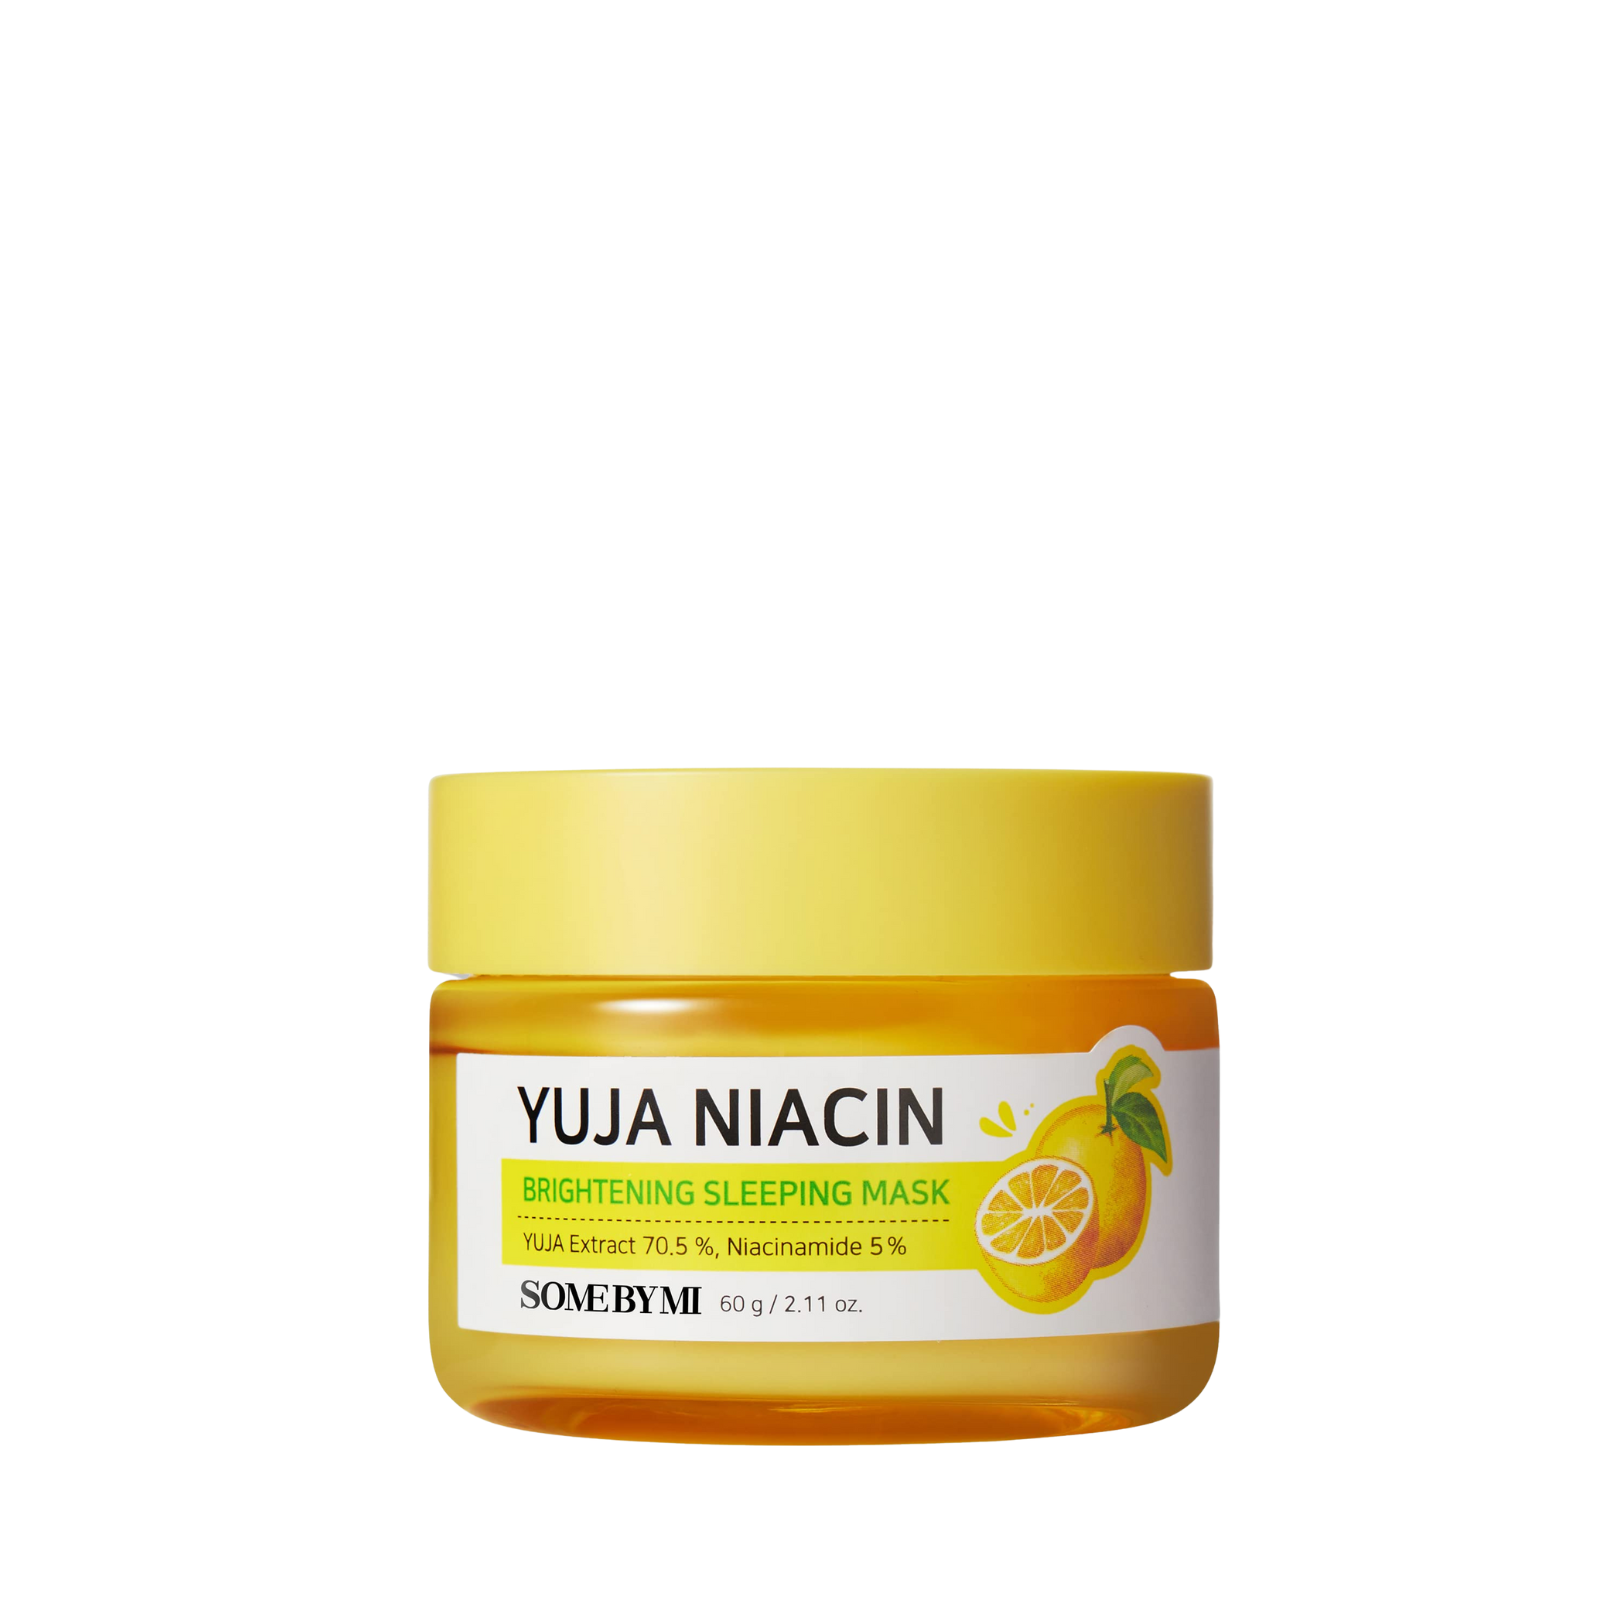 Night brightening tone mask for the face by Some By Mi (Some By Mi Yuja Niacin 30 Days Miracle Brightening Sleeping Mask)